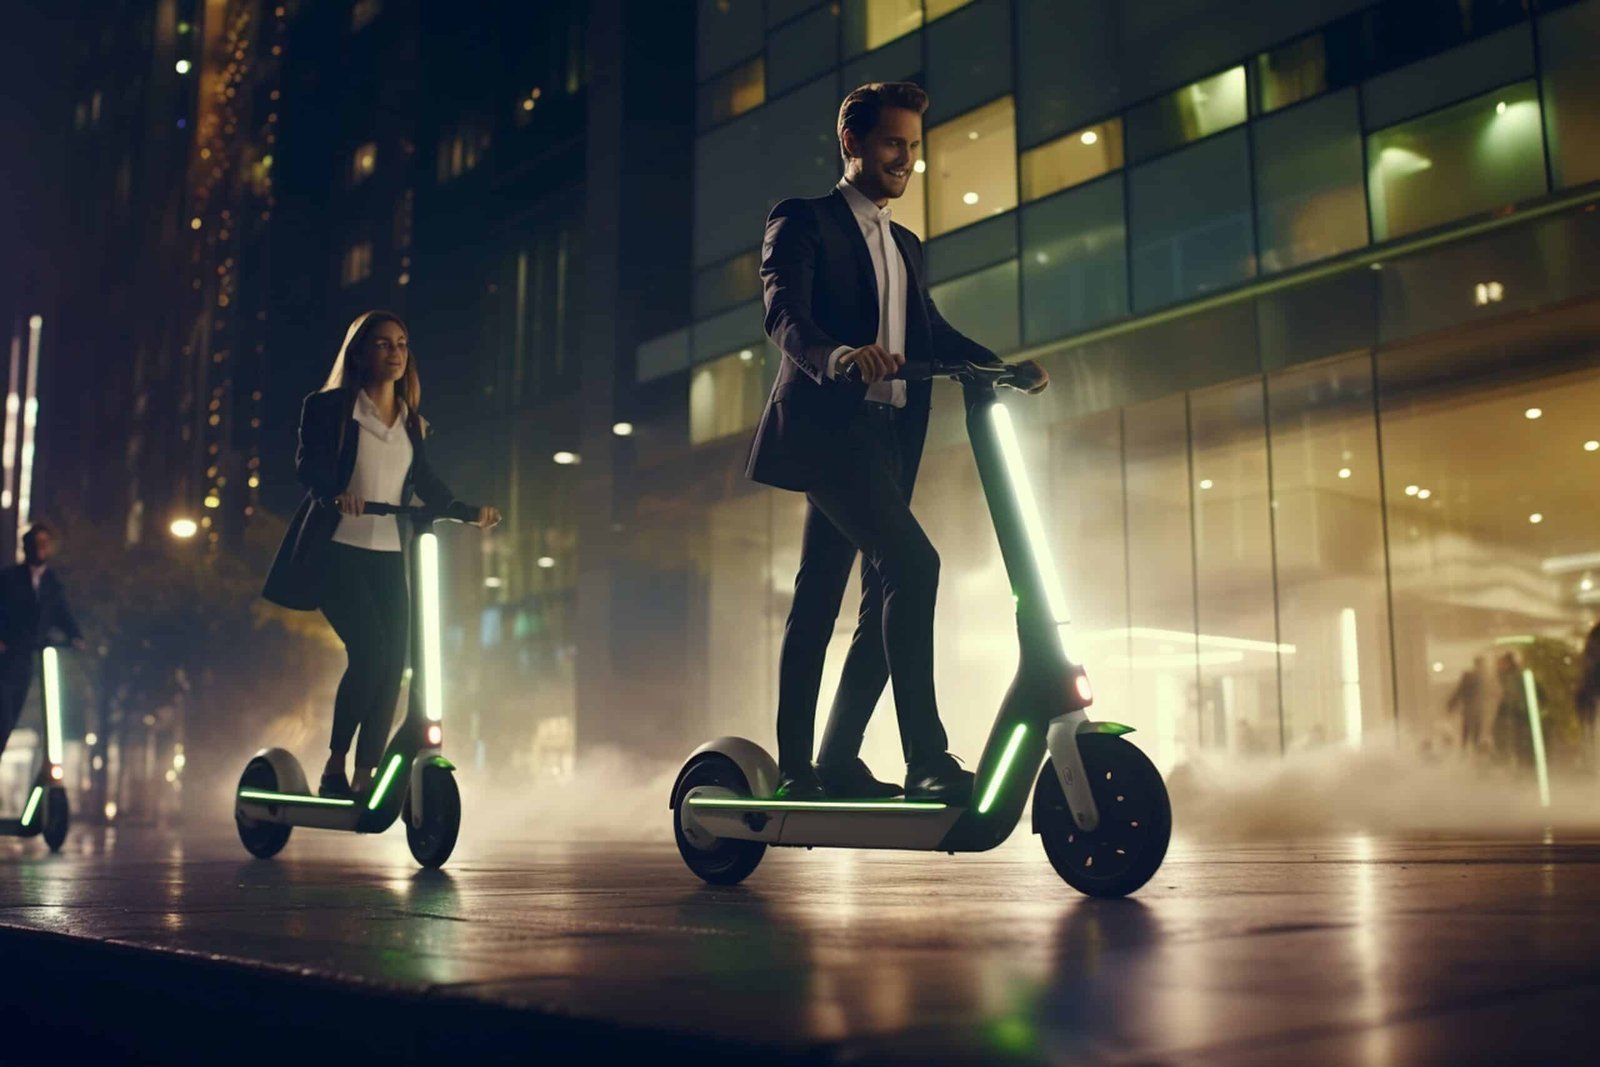 You are currently viewing Explore The Future Of Personal Transport With Segway’s Innovative Electric Vehicles